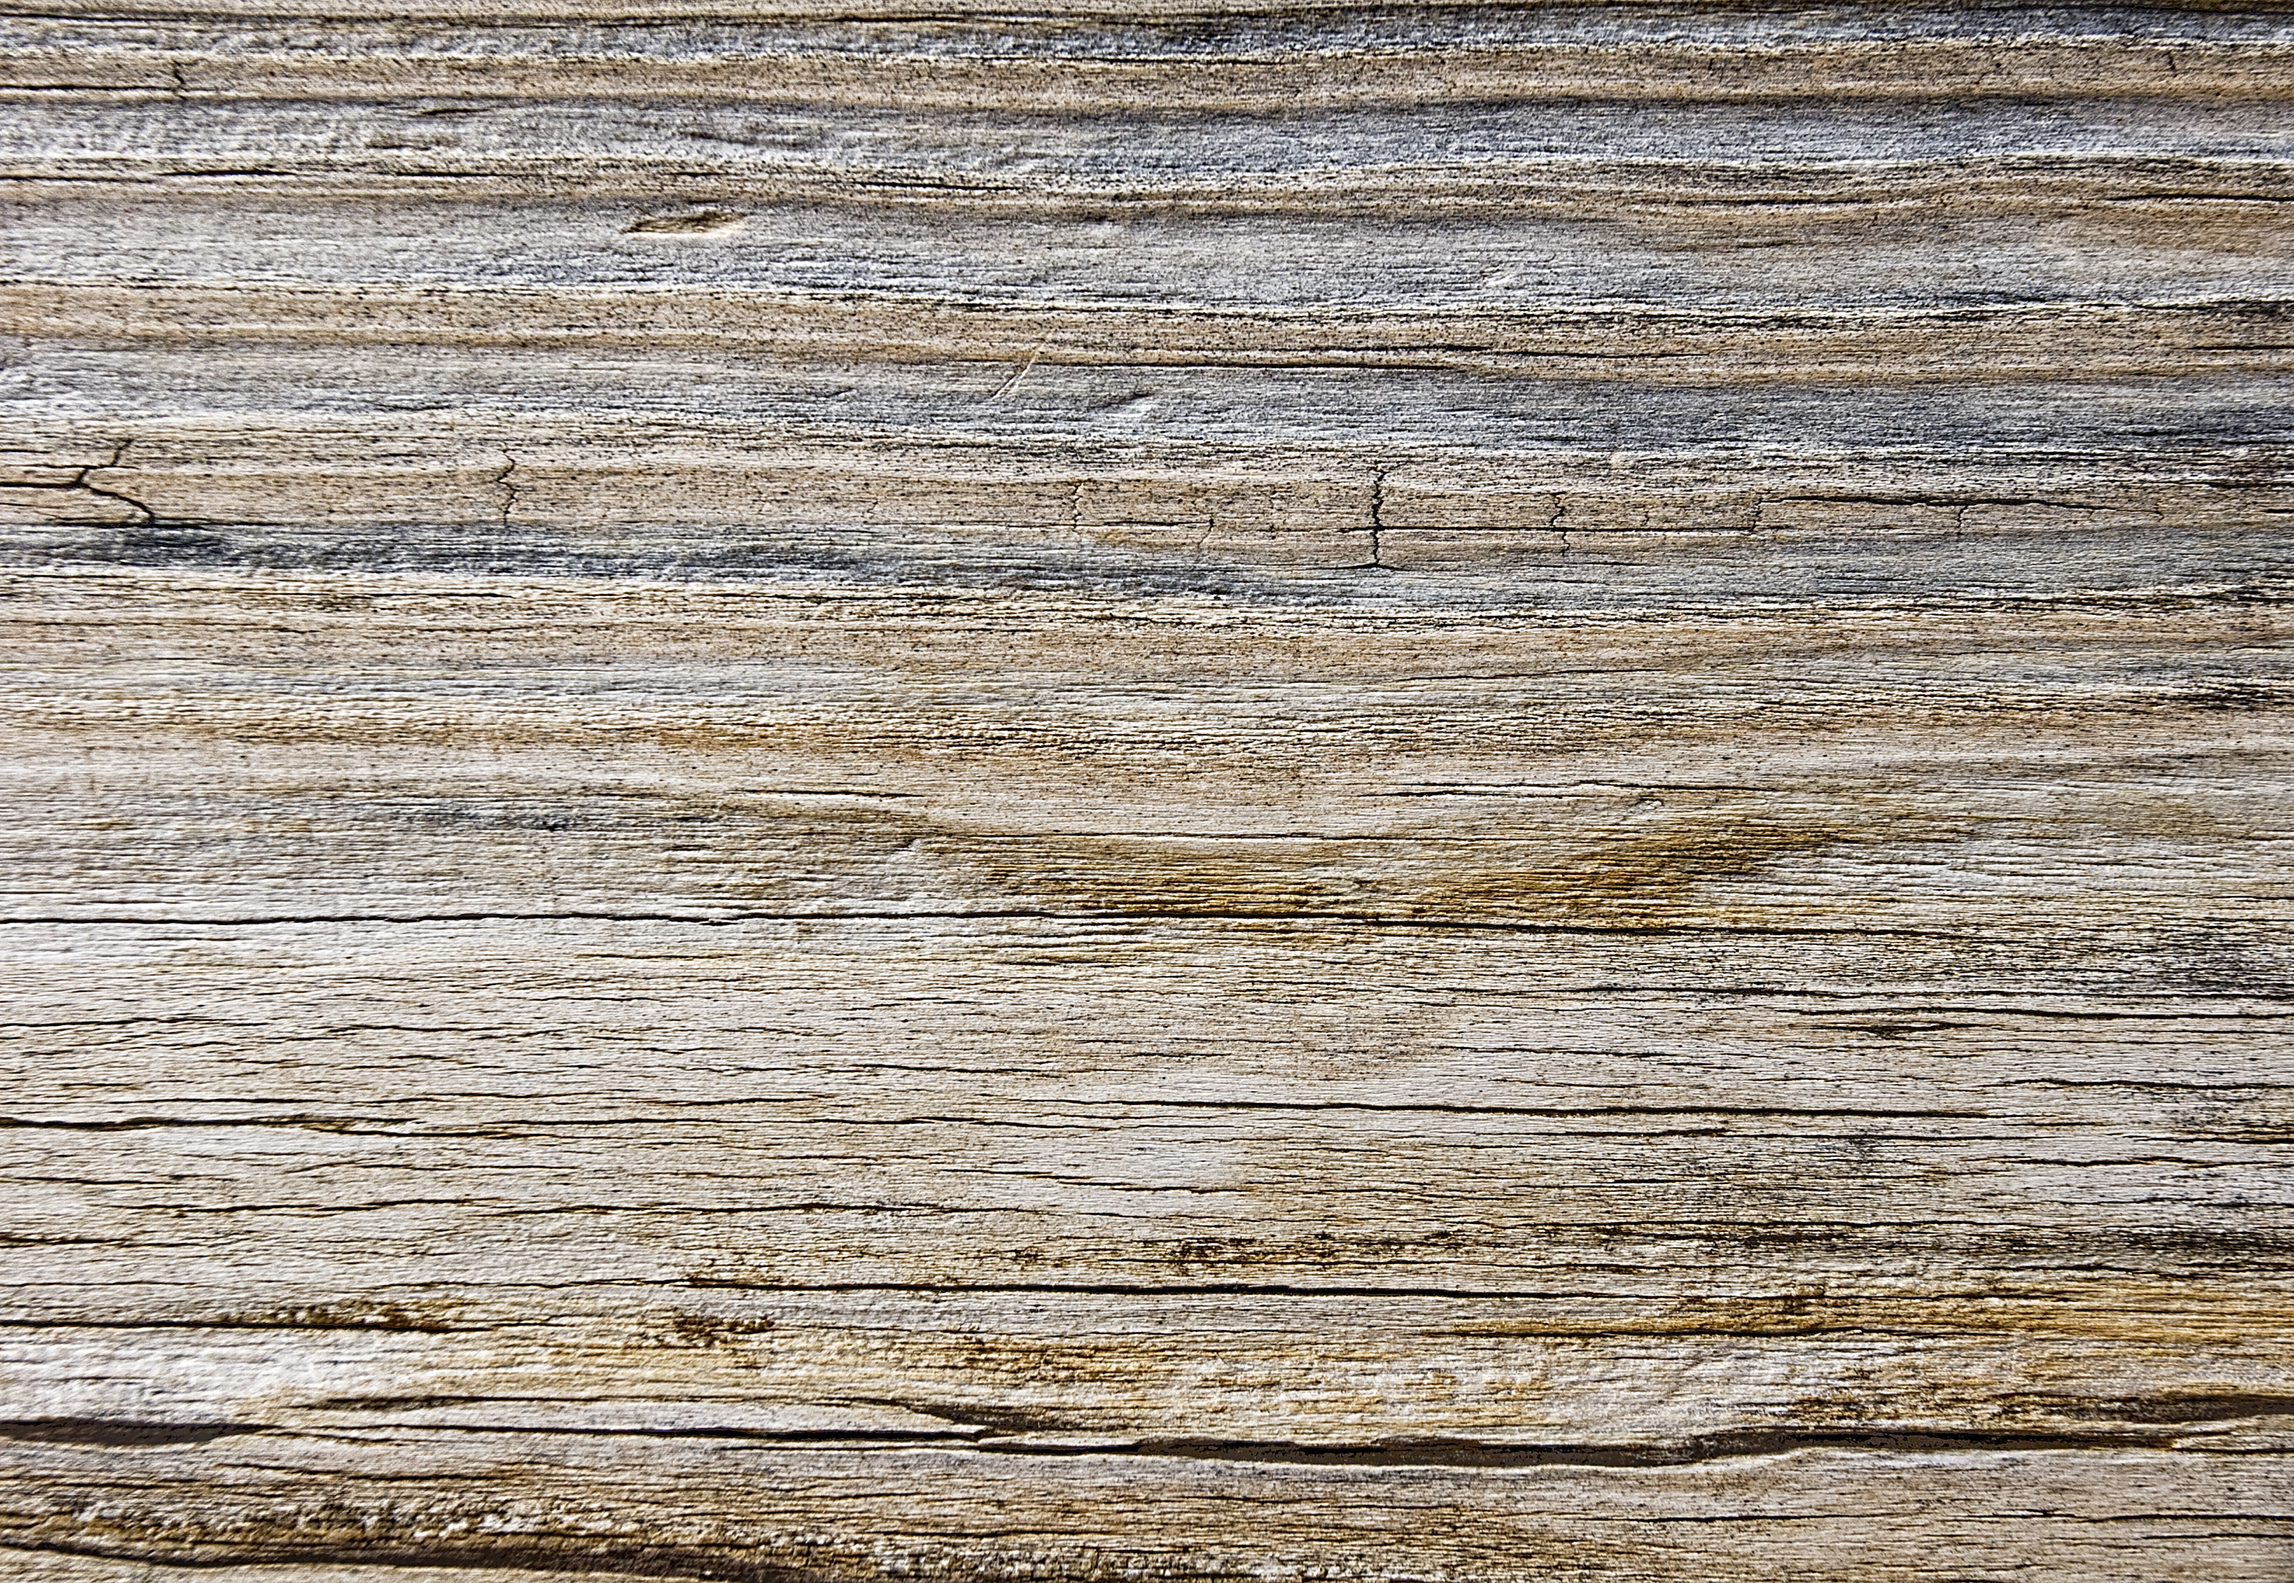 Weathered Wood Texture | photo page - everystockphoto